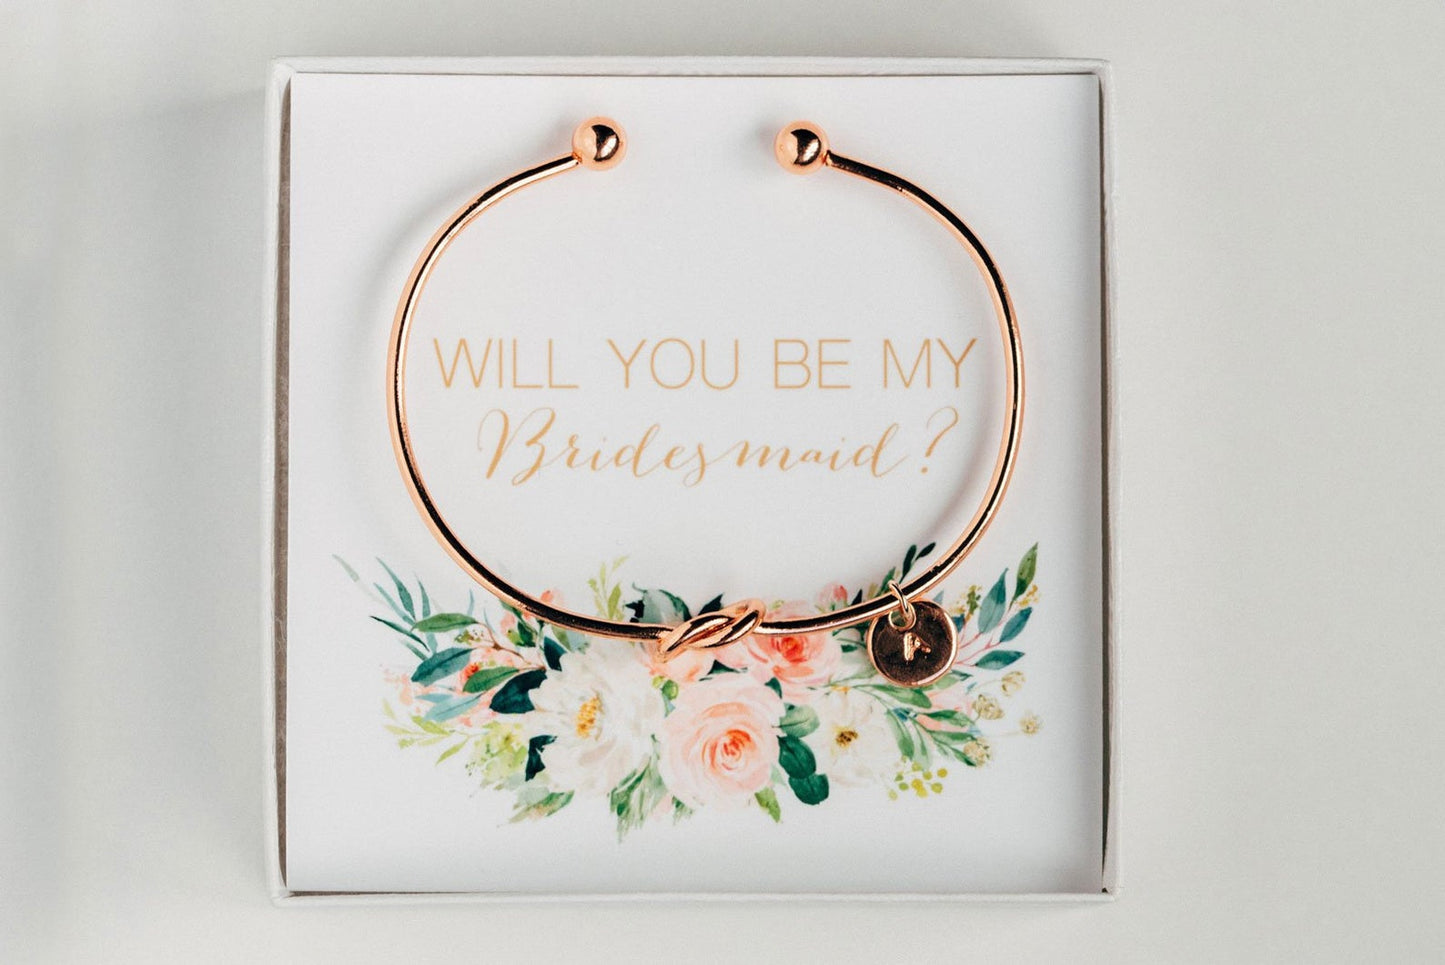 Golden personalized bridesmaid proposal bracelet with a initial charm in a box that says "Will you be my bridesmaid?"  